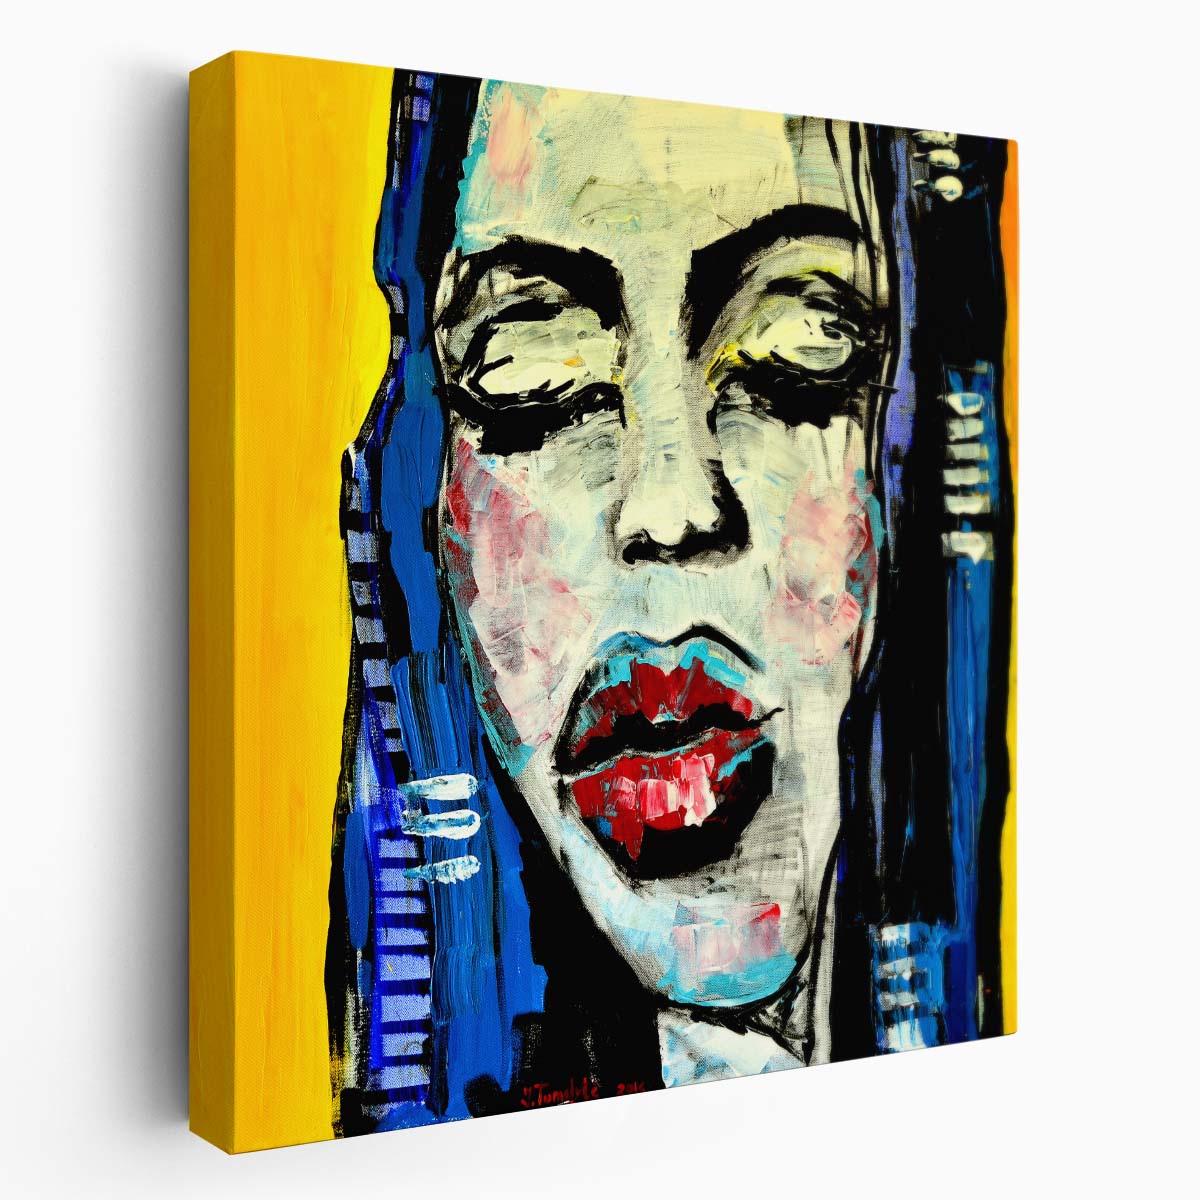 Expressive Woman Portrait Oil Painting by Julija Tumelyte Wall Art by Luxuriance Designs. Made in USA.